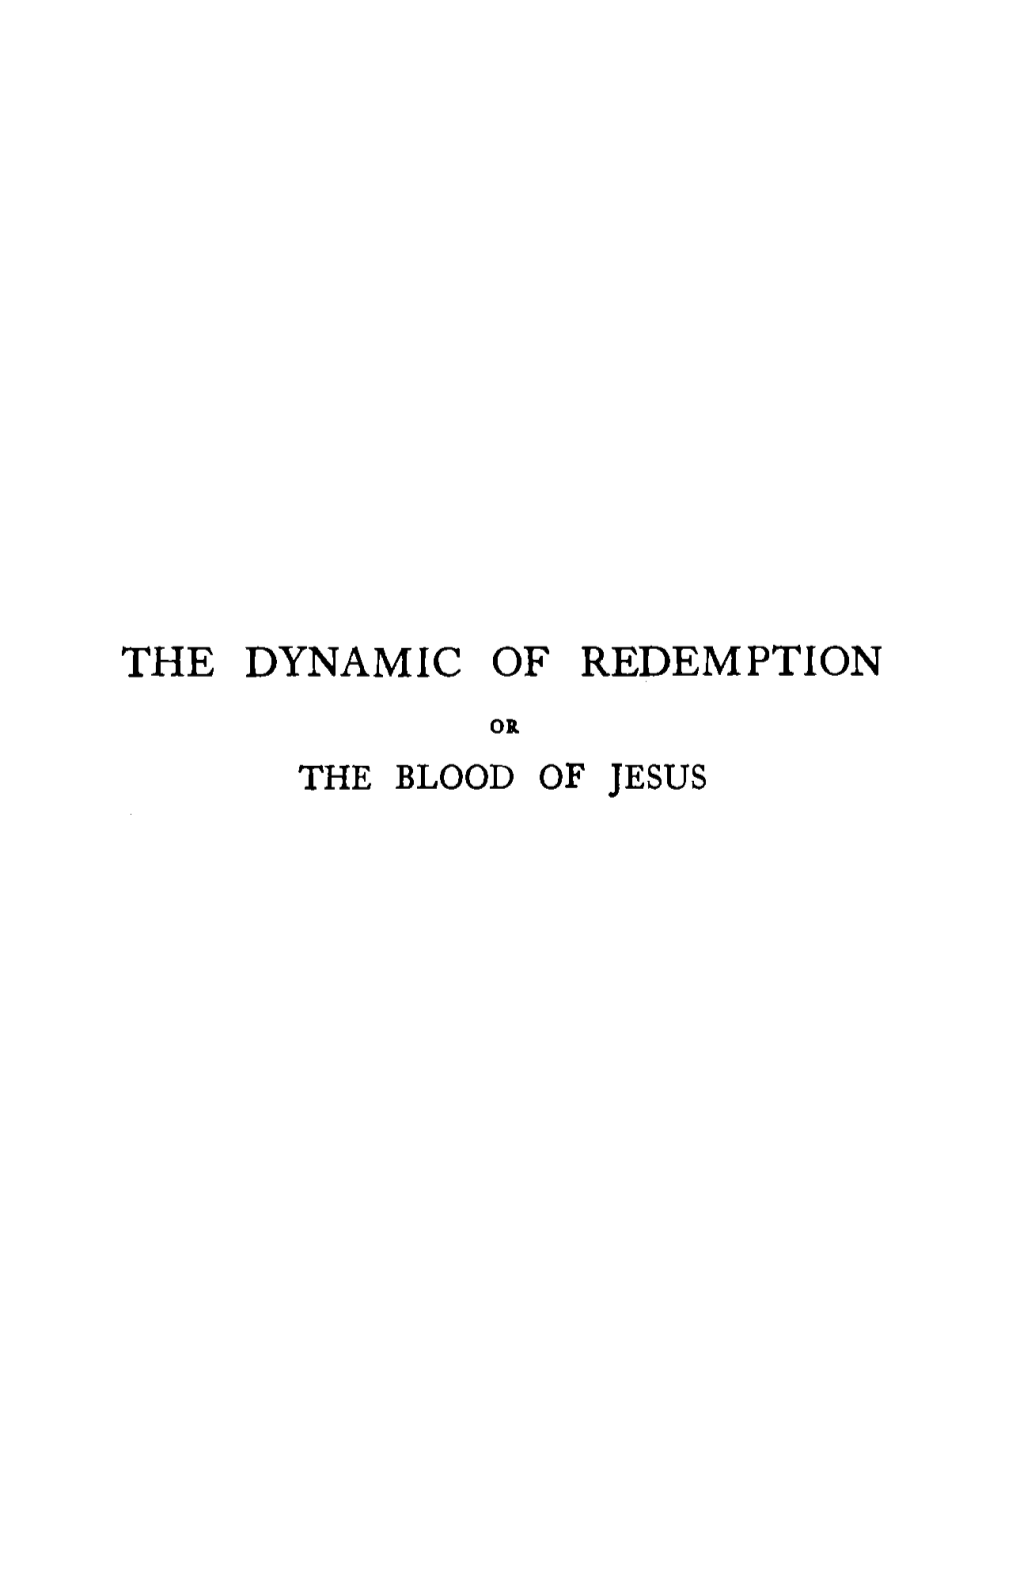 The Dynamic of Redemption